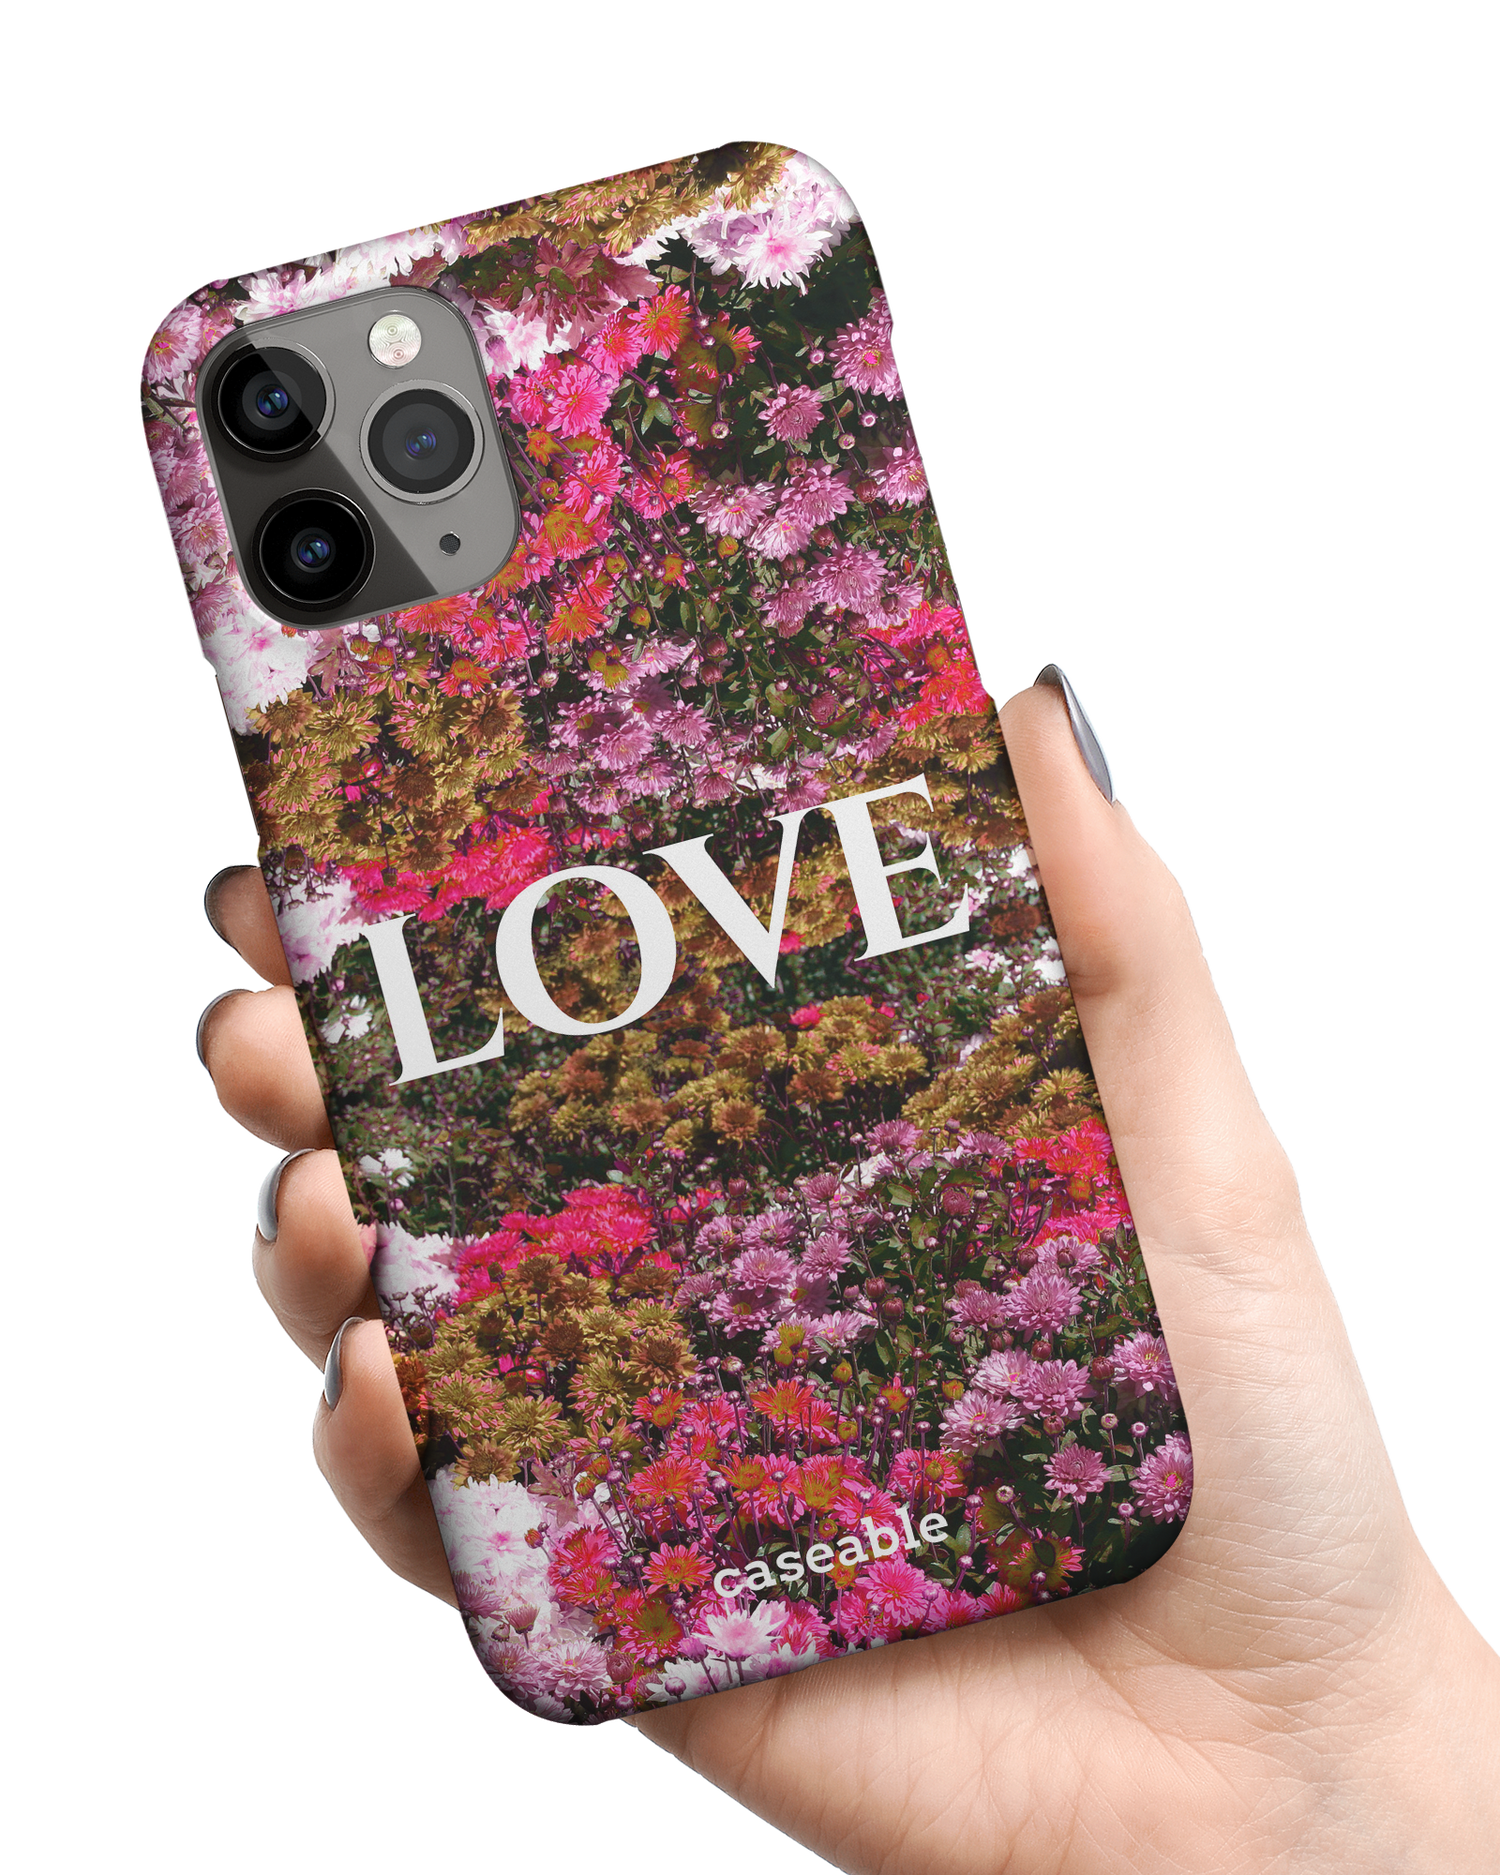 Luxe Love Hard Shell Phone Case Apple iPhone 11 Pro Max held in hand